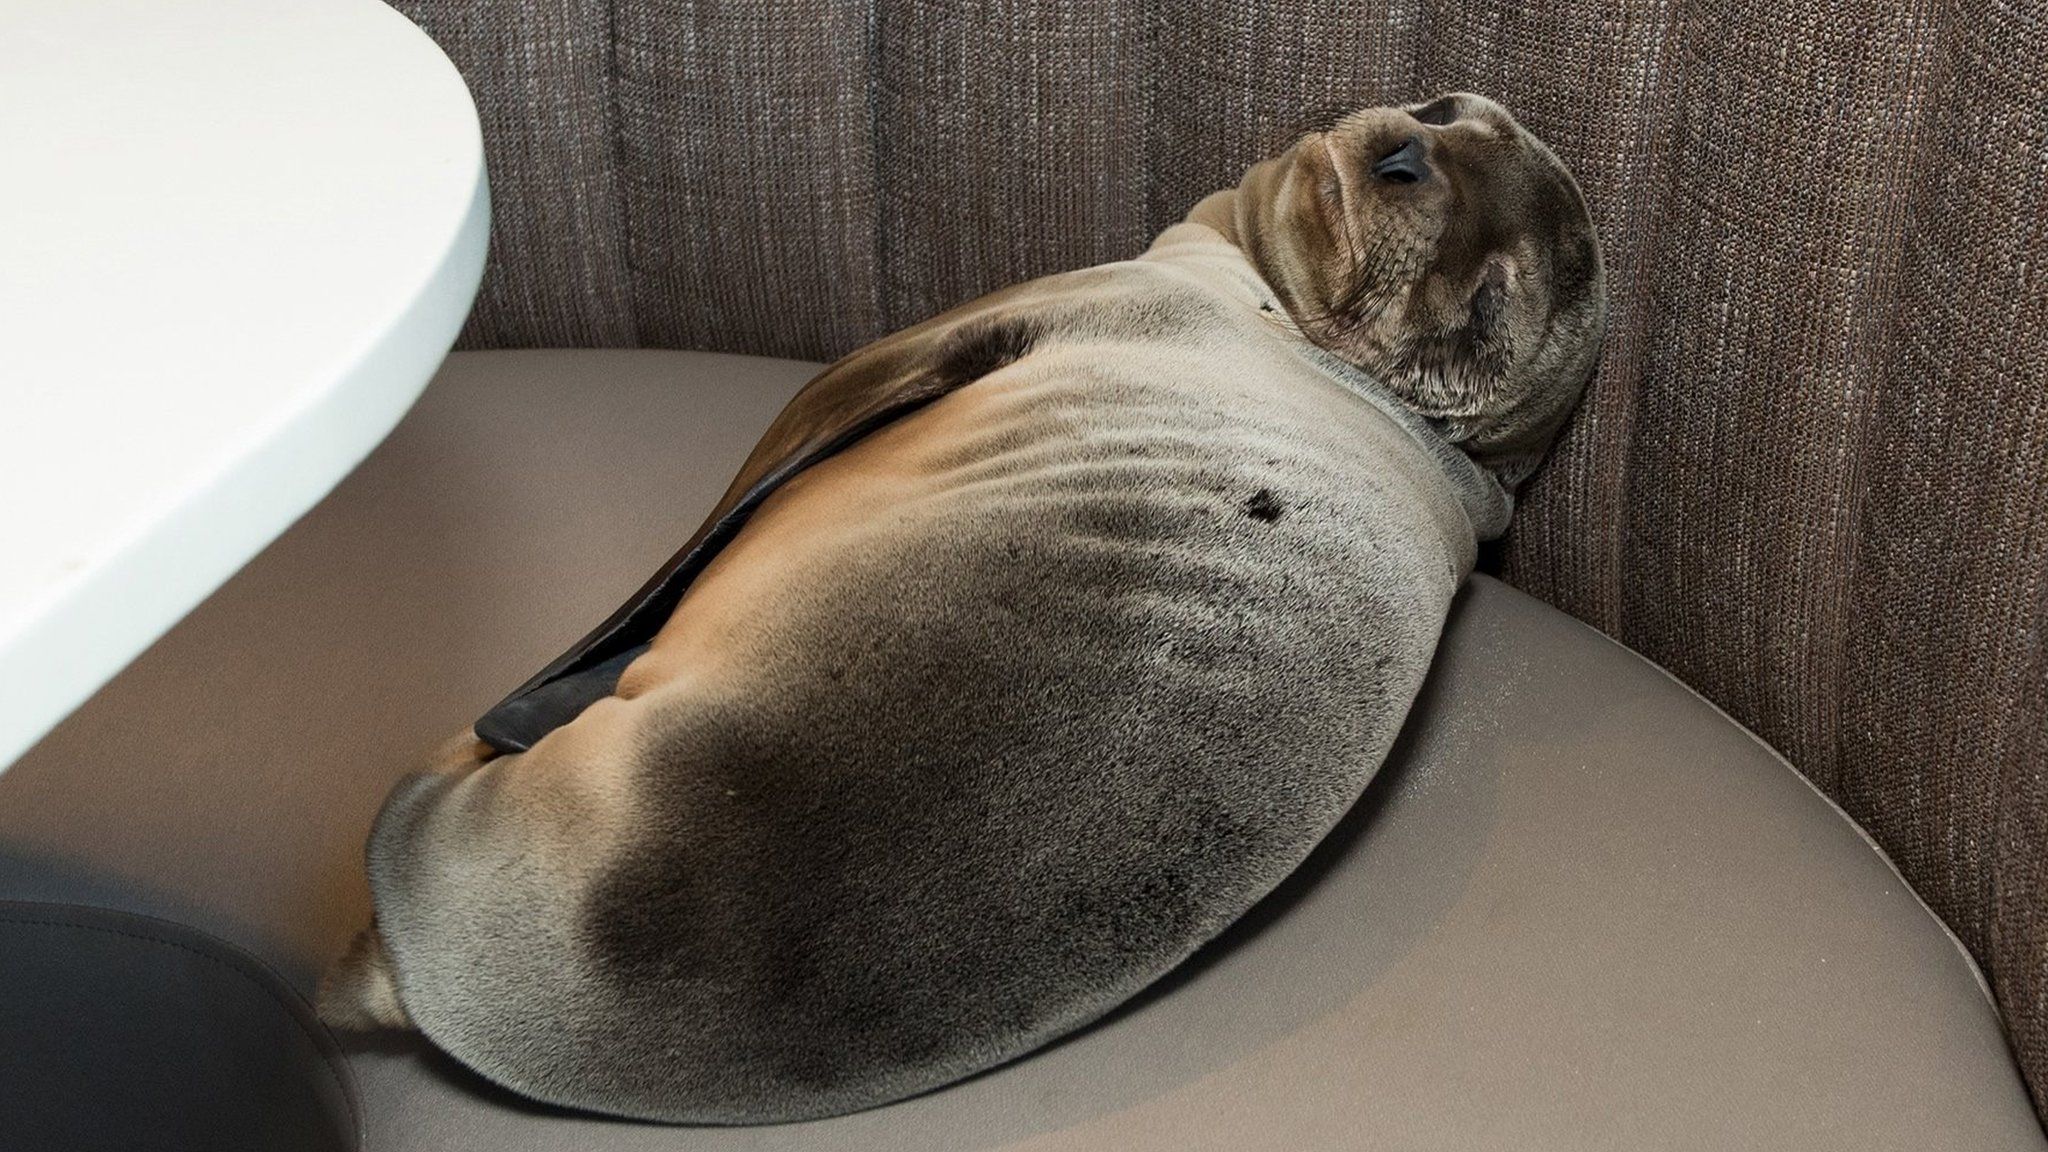 An eight-month-old female California sea lion pup is seen after being found sleeping in a booth in the dining room of the iconic Marine Room restaurant in San Diego